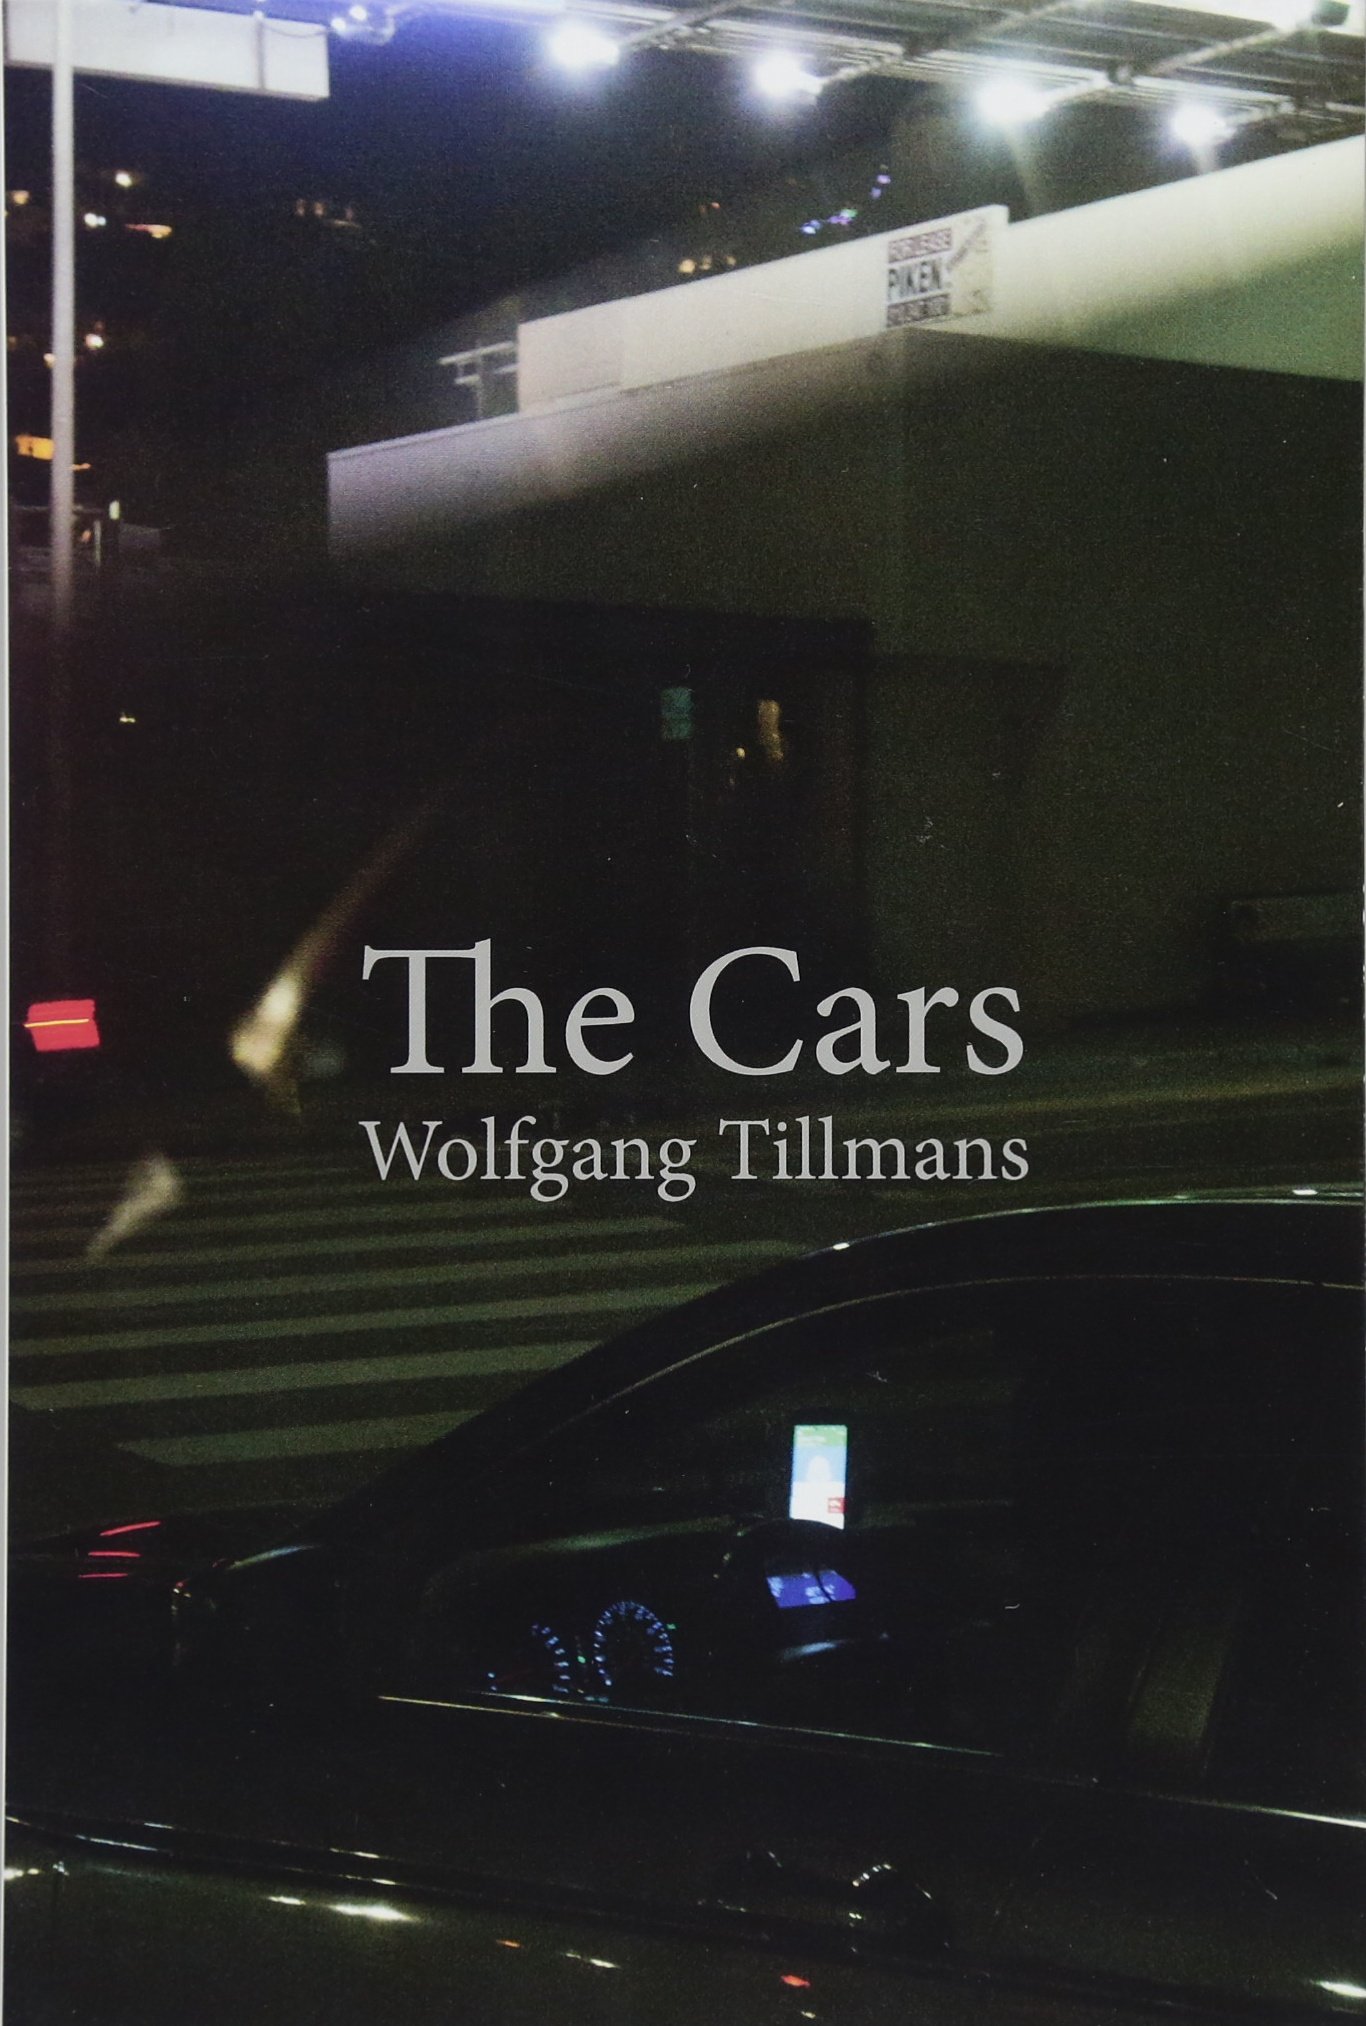 The Cars Paperback September 29, - Wolfgang Tillmans Concorde Book , HD Wallpaper & Backgrounds